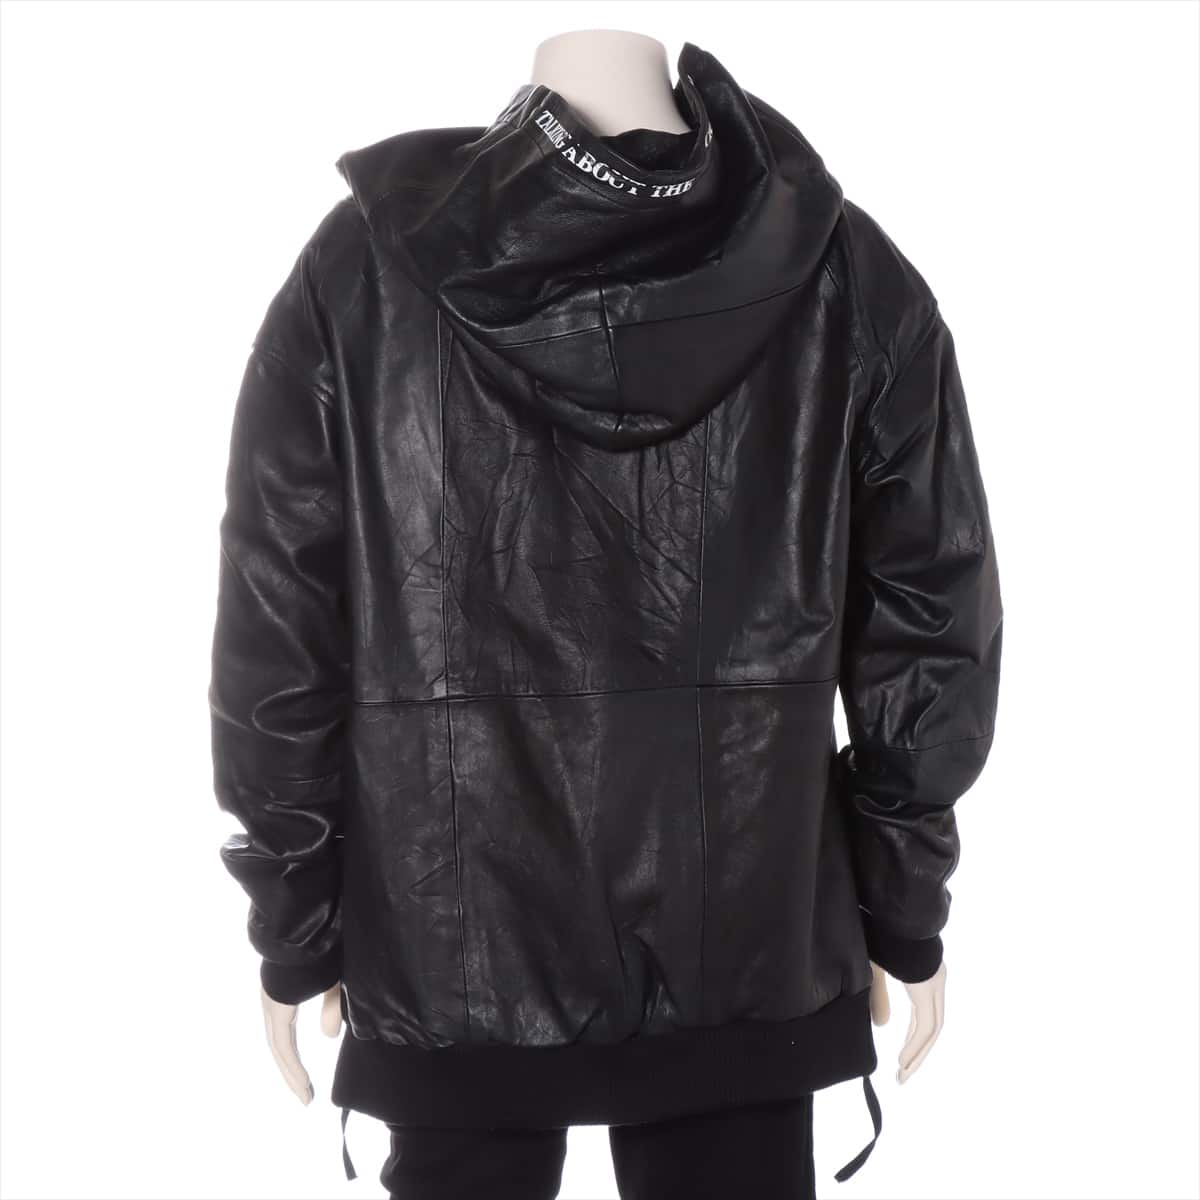 Talking About the Abstraction Leather Parker 3 Men's Black  Side zip